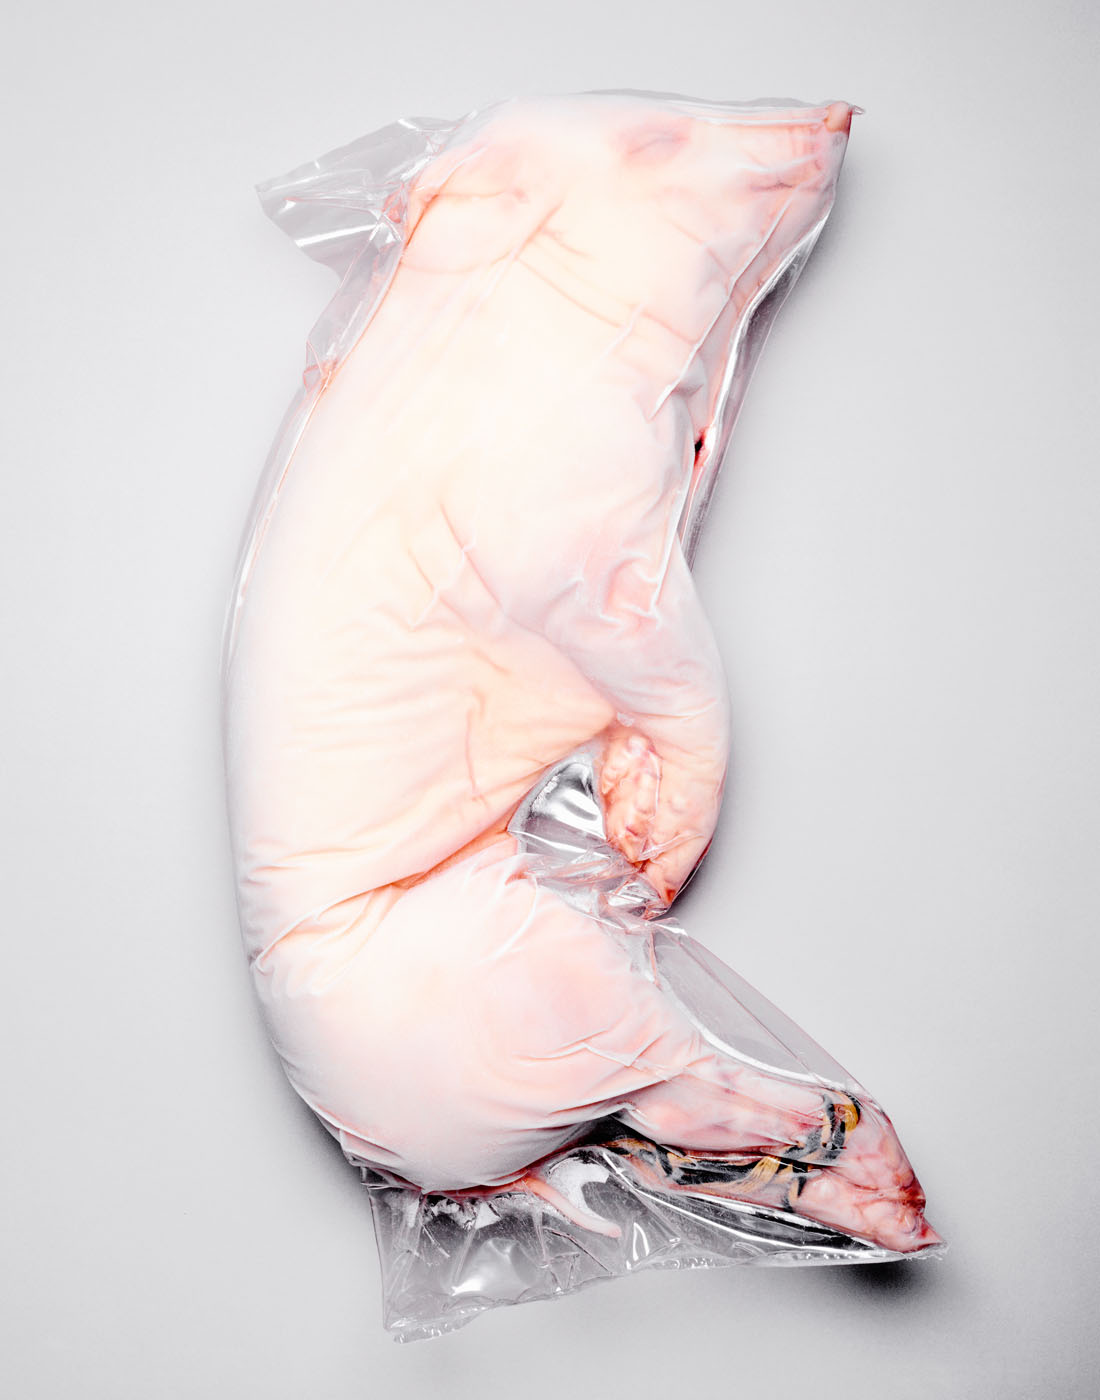 Dead pig by Alexander Kent London based still life and product photographer.